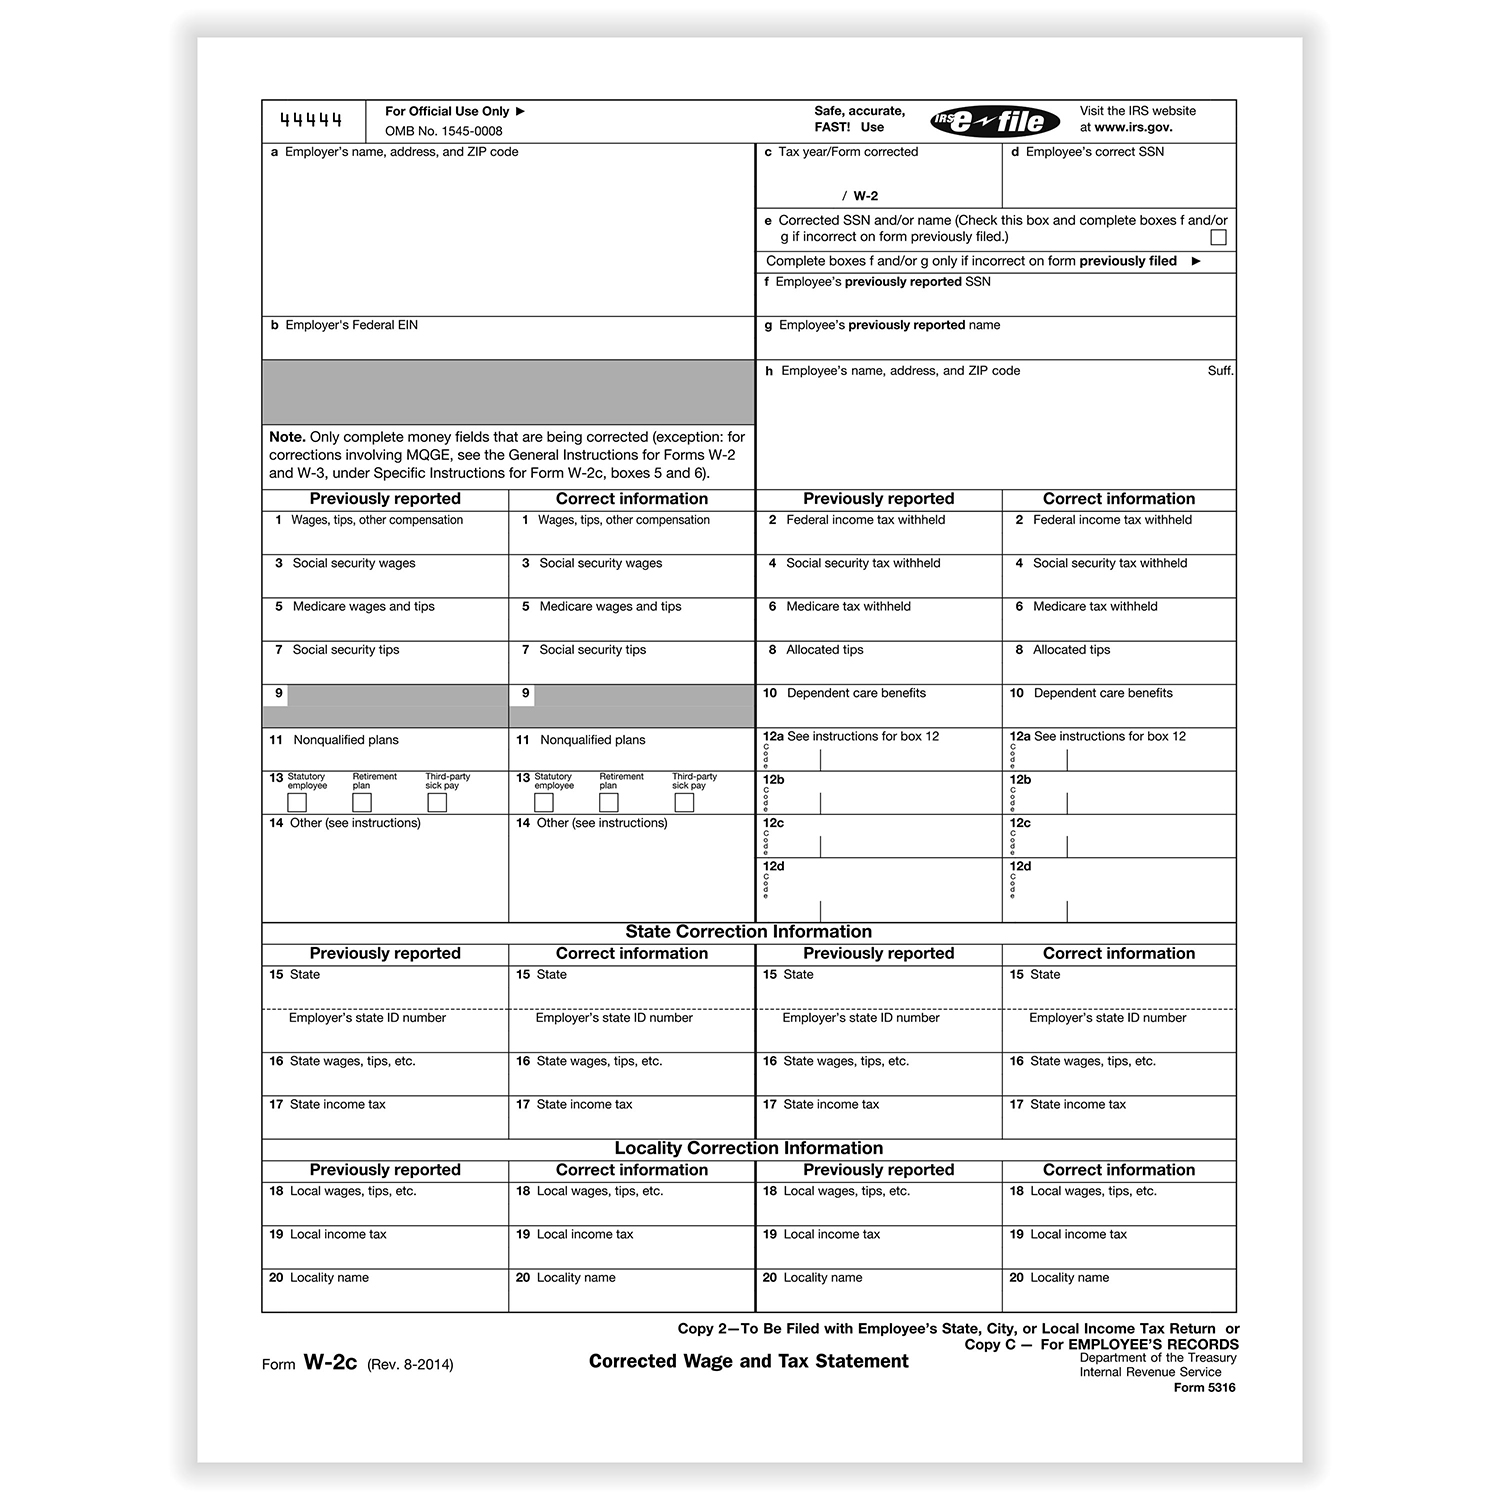 Picture of W-2C Copy 2 or C